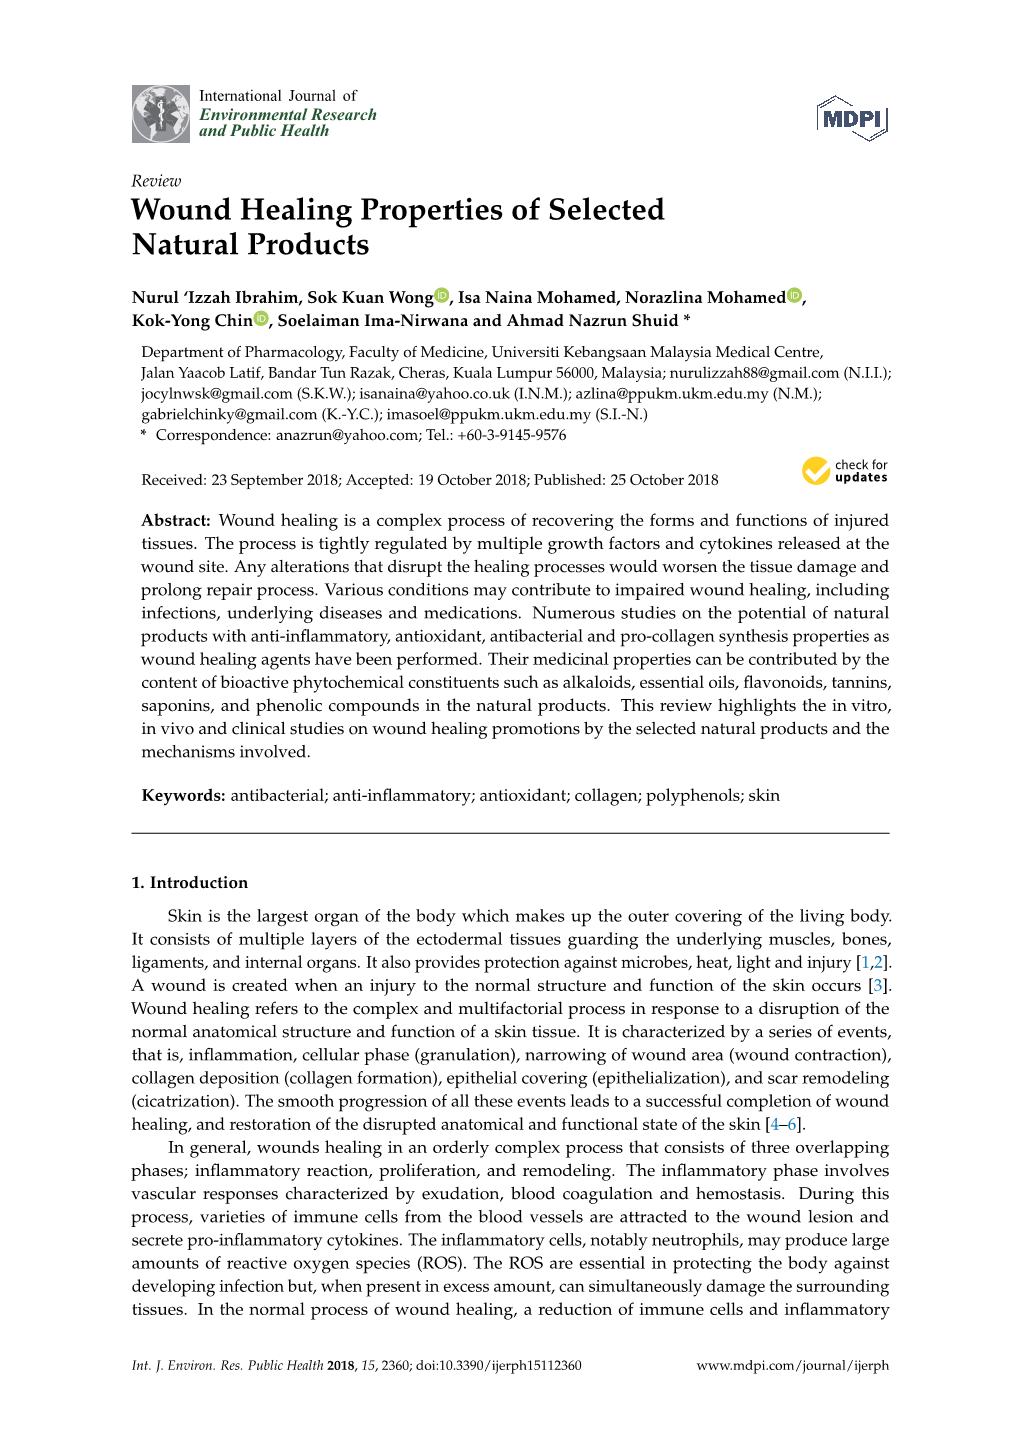 Wound Healing Properties of Selected Natural Products